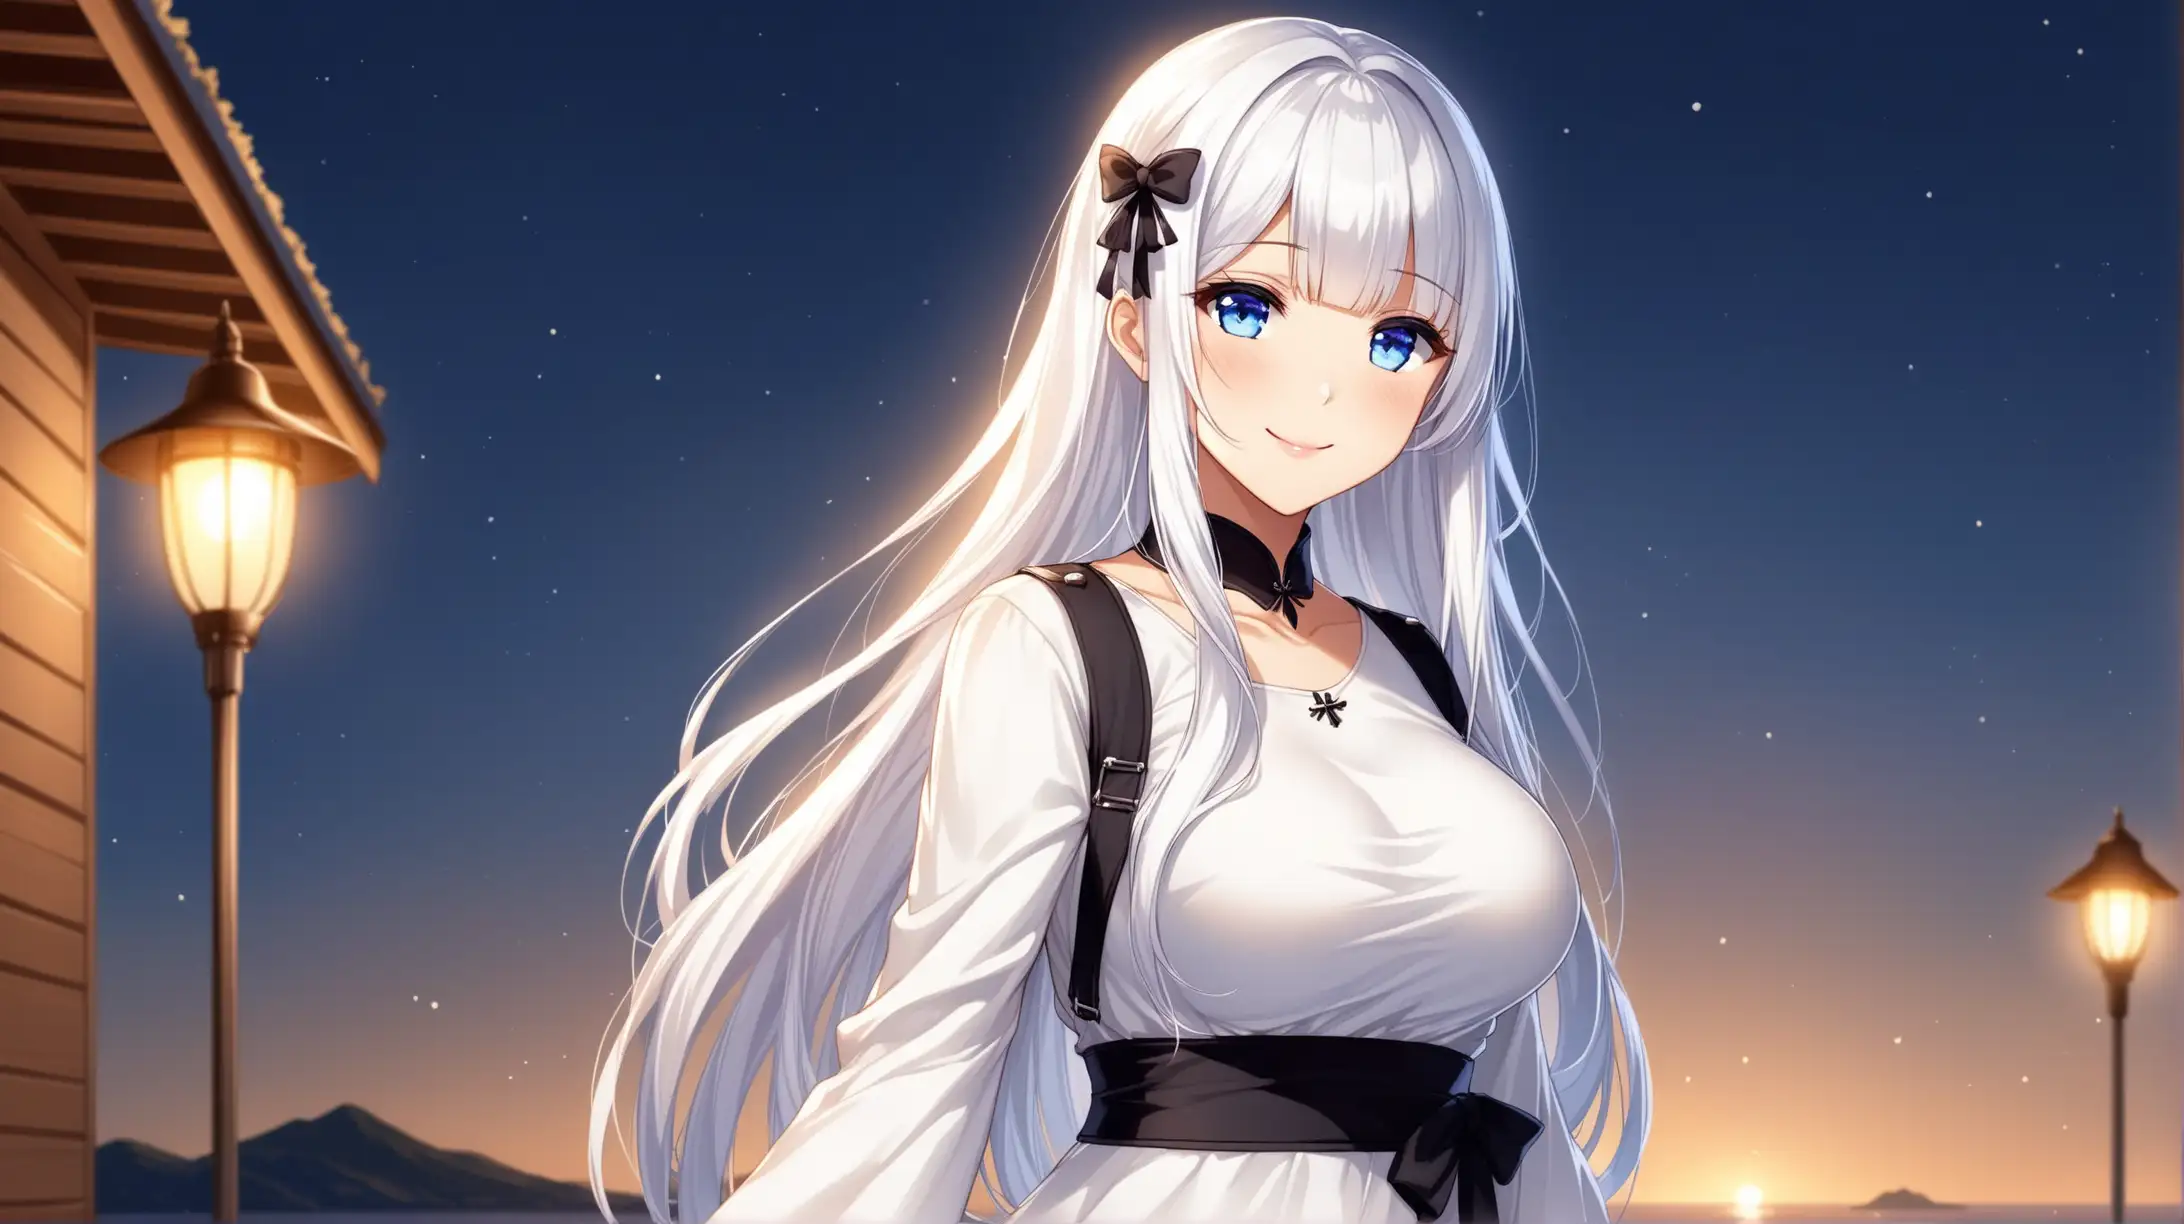 Draw the character Illustrious from Azur Lane, long hair, blue eyes, high quality, outdoors, dim lighting, standing in a relaxed pose, medium shot, casual clothing, smiling at the viewer